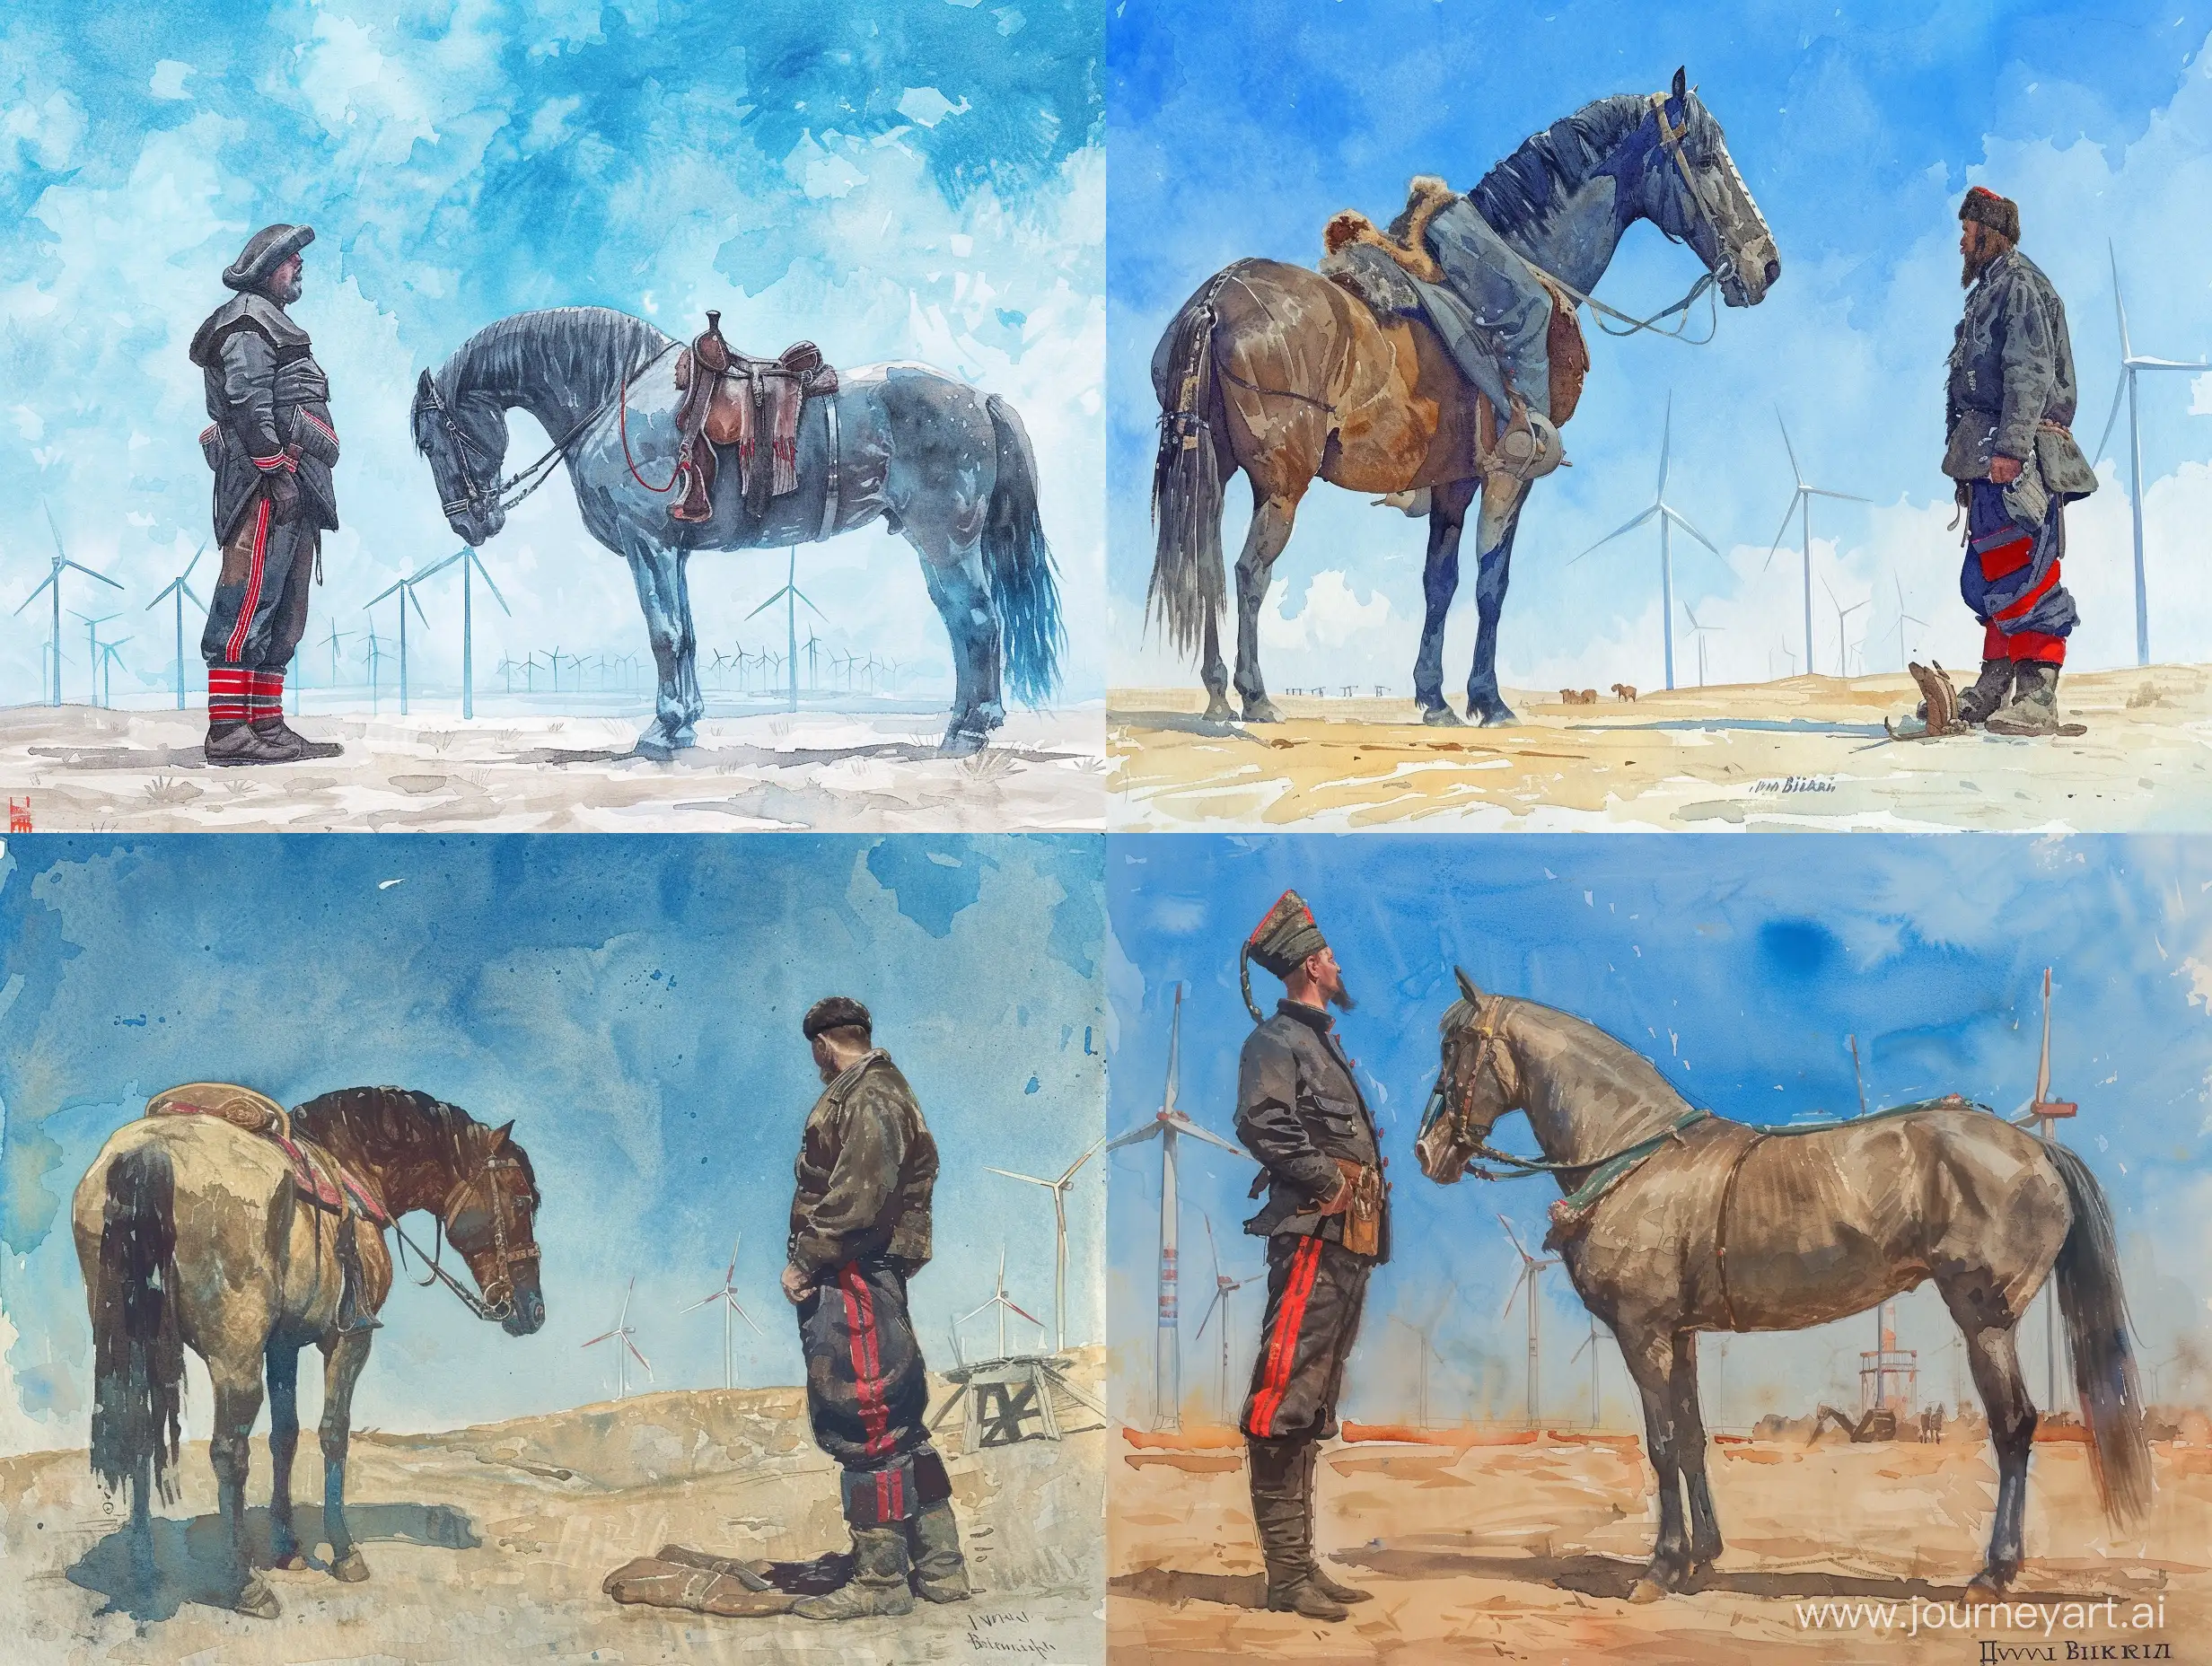 A huge horseman in the foreground, a horse stands in profile, the rider is dressed in dark trousers with red stripes, a Cossack hat, a jacket, against a background of blue sky and wind turbines, in the background, watercolor, Ivan Bilibin style